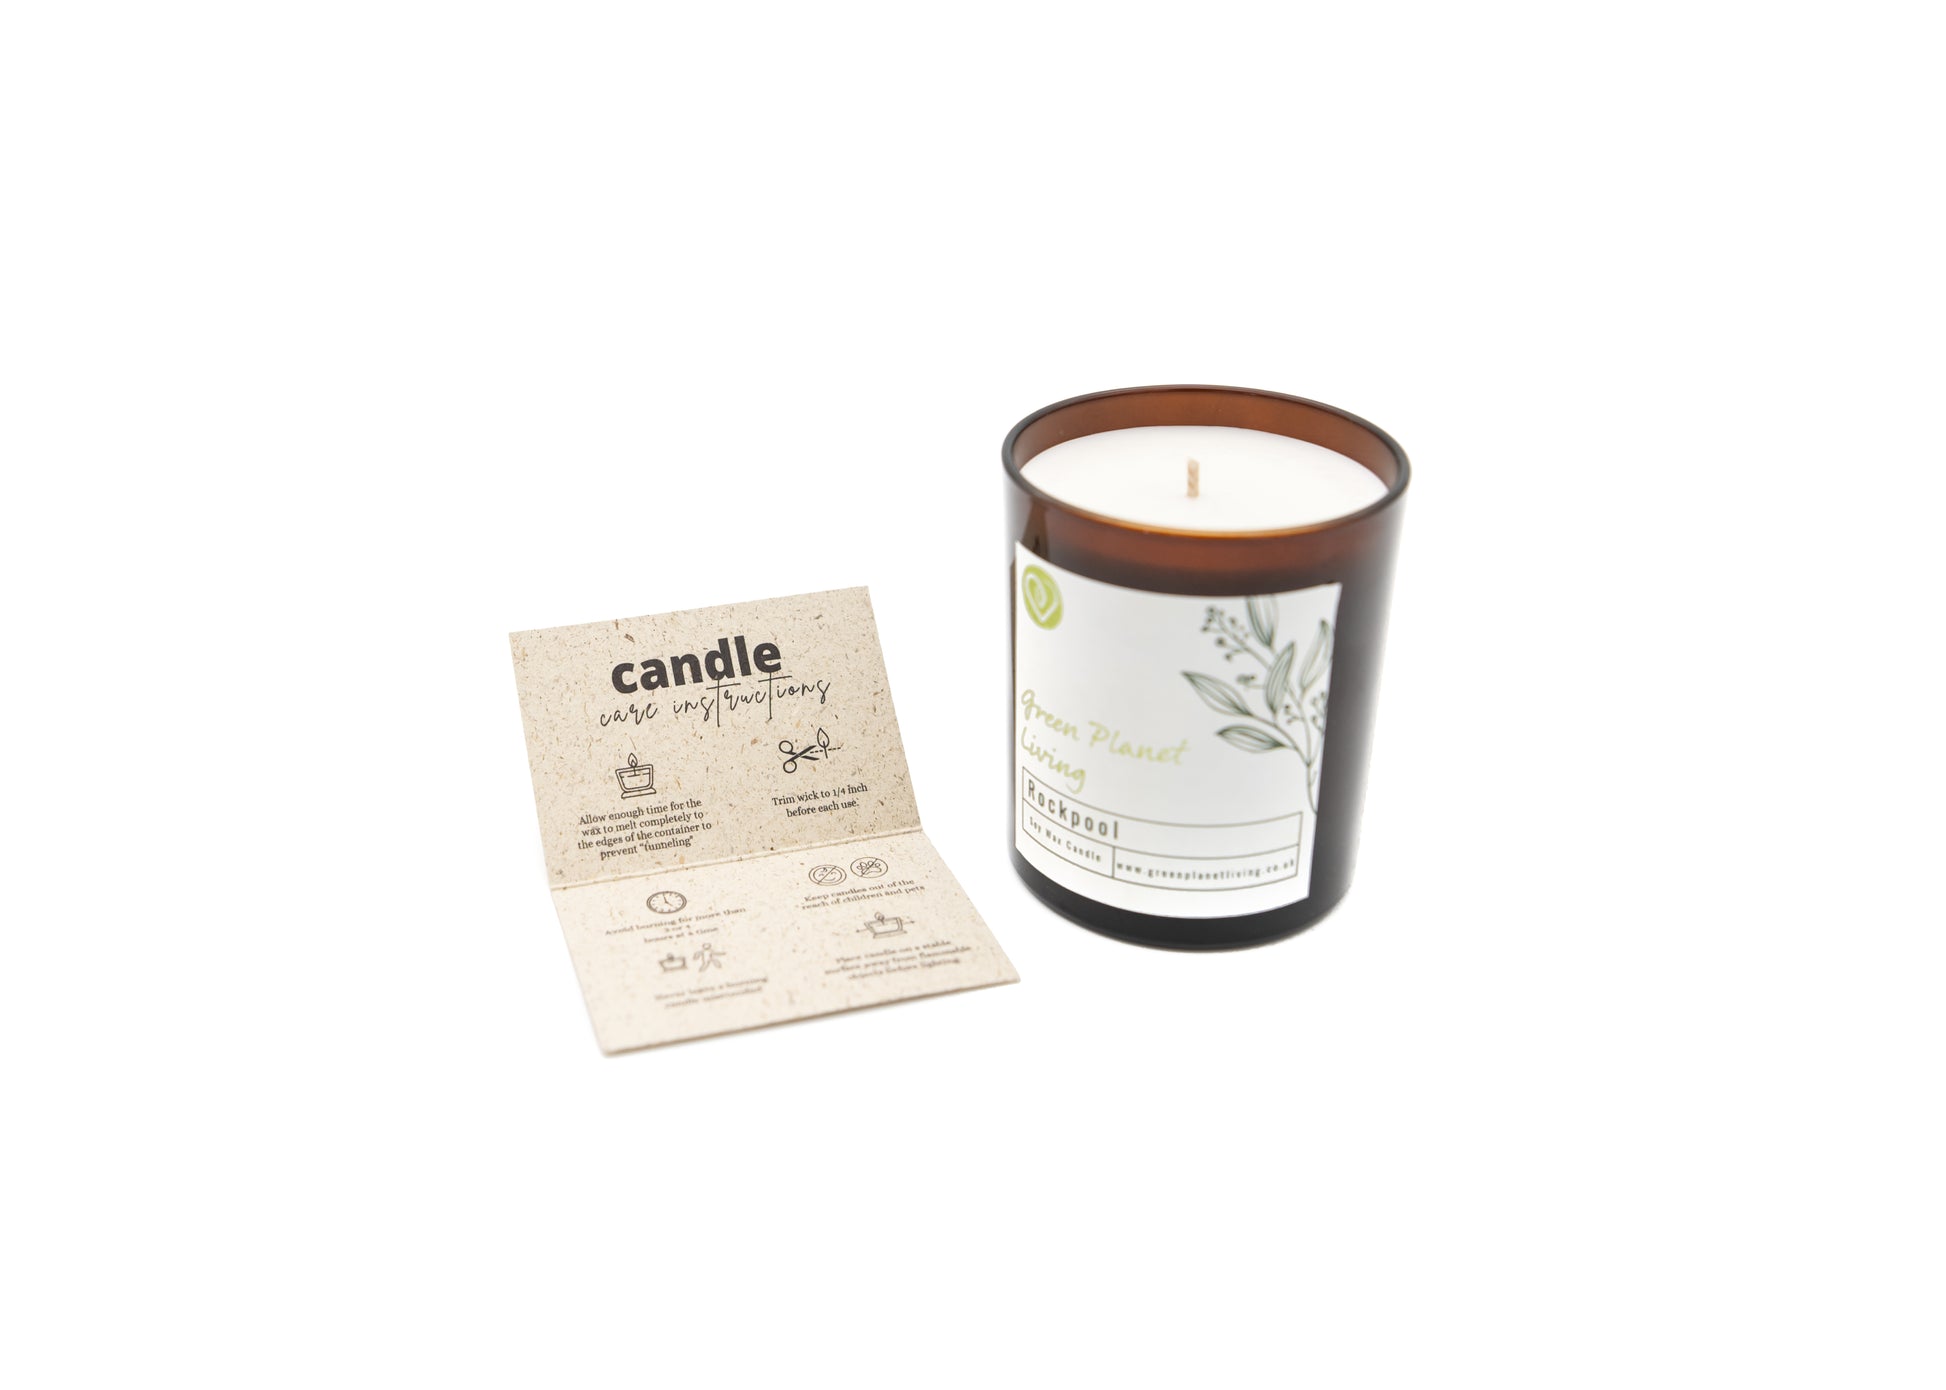 green planet living Rockpool candle in amber jar sat with candle care card on a white background